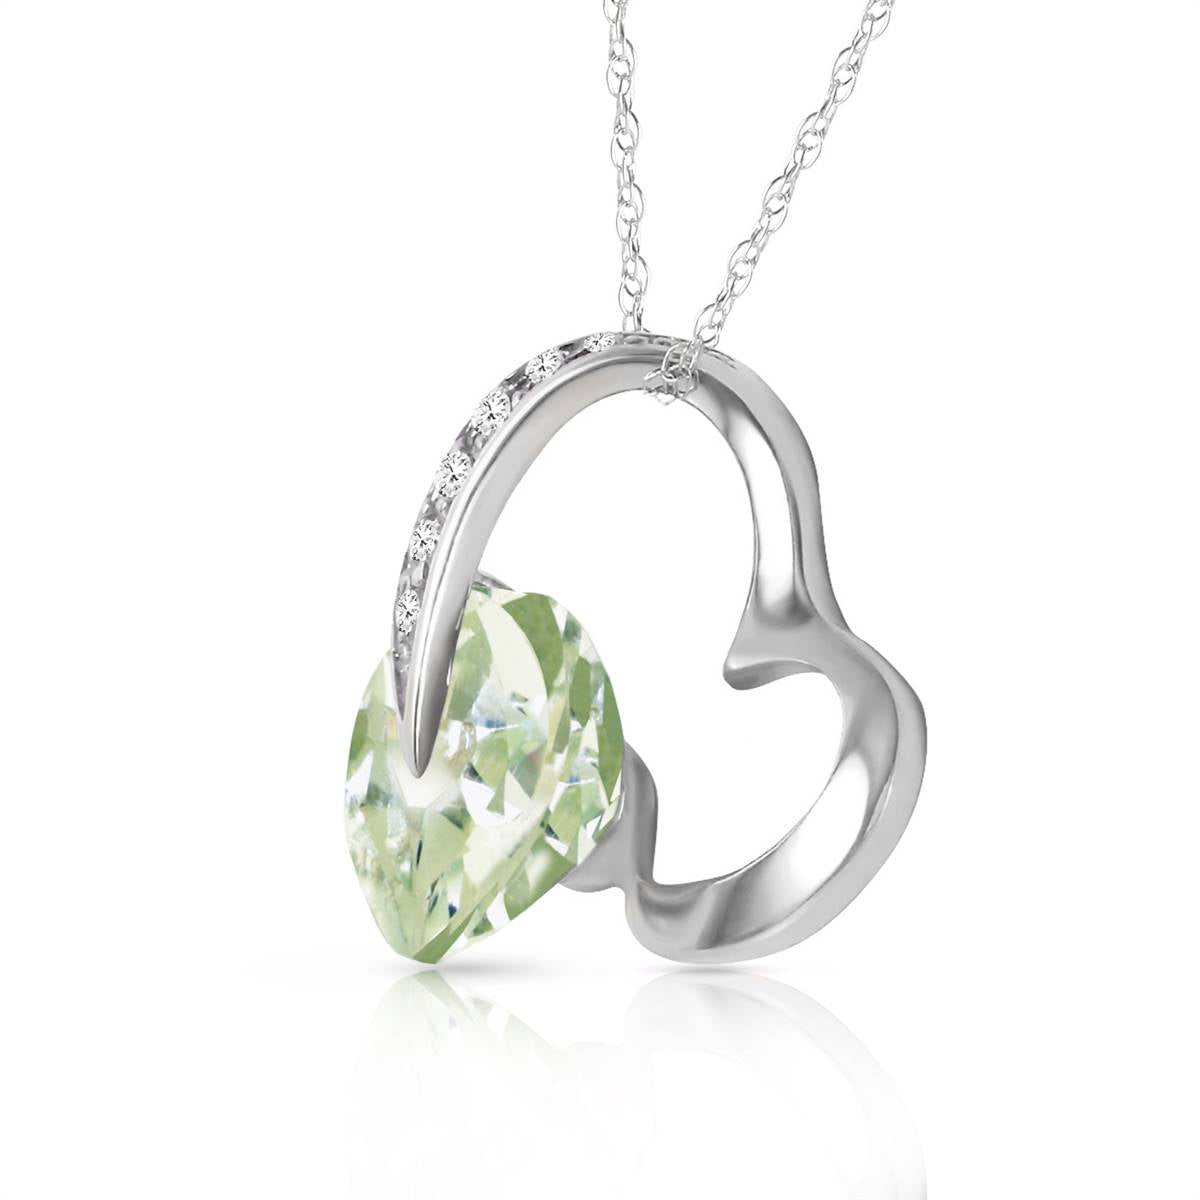 14K Solid White Gold Heart Necklace Natural Diamond & Green Amethyst